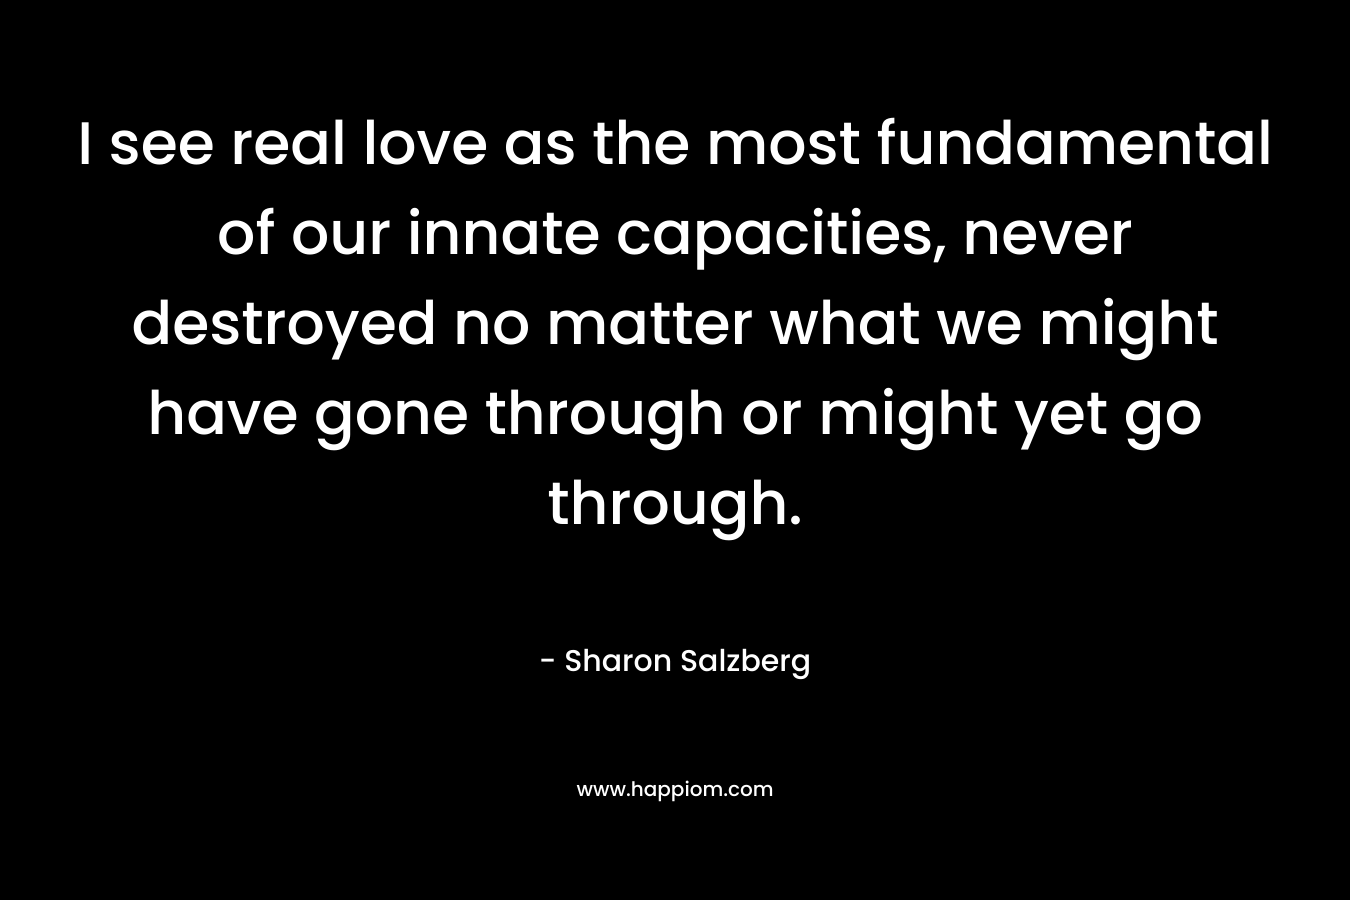 I see real love as the most fundamental of our innate capacities, never destroyed no matter what we might have gone through or might yet go through.